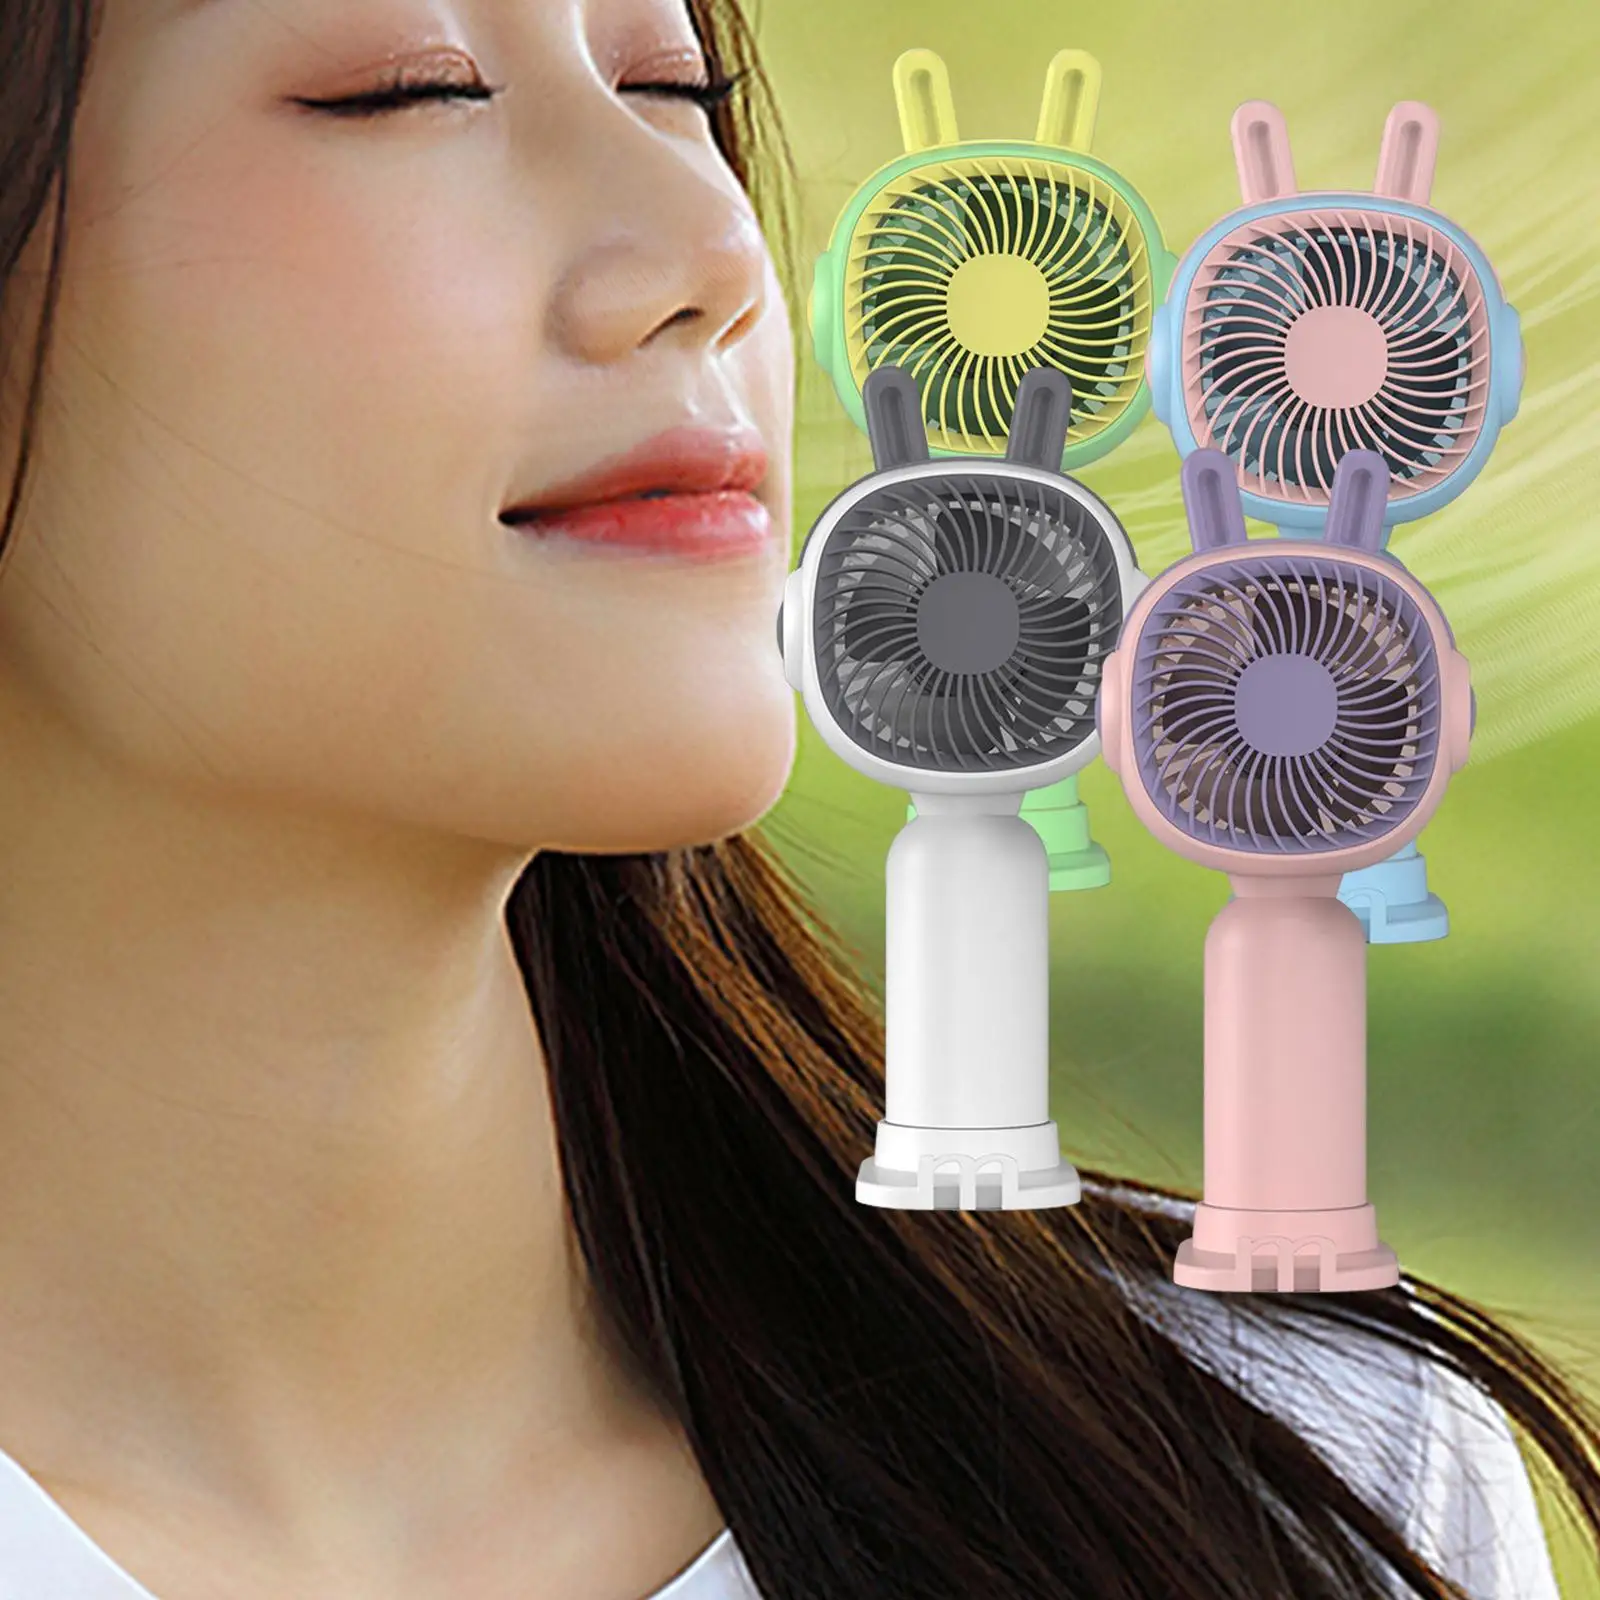 Personal Fan with Phone Stand Be Used as A Mobile Phone Holder Cute Mini Portable Fan for Dormitory Kitchen Summer Sports Hiking